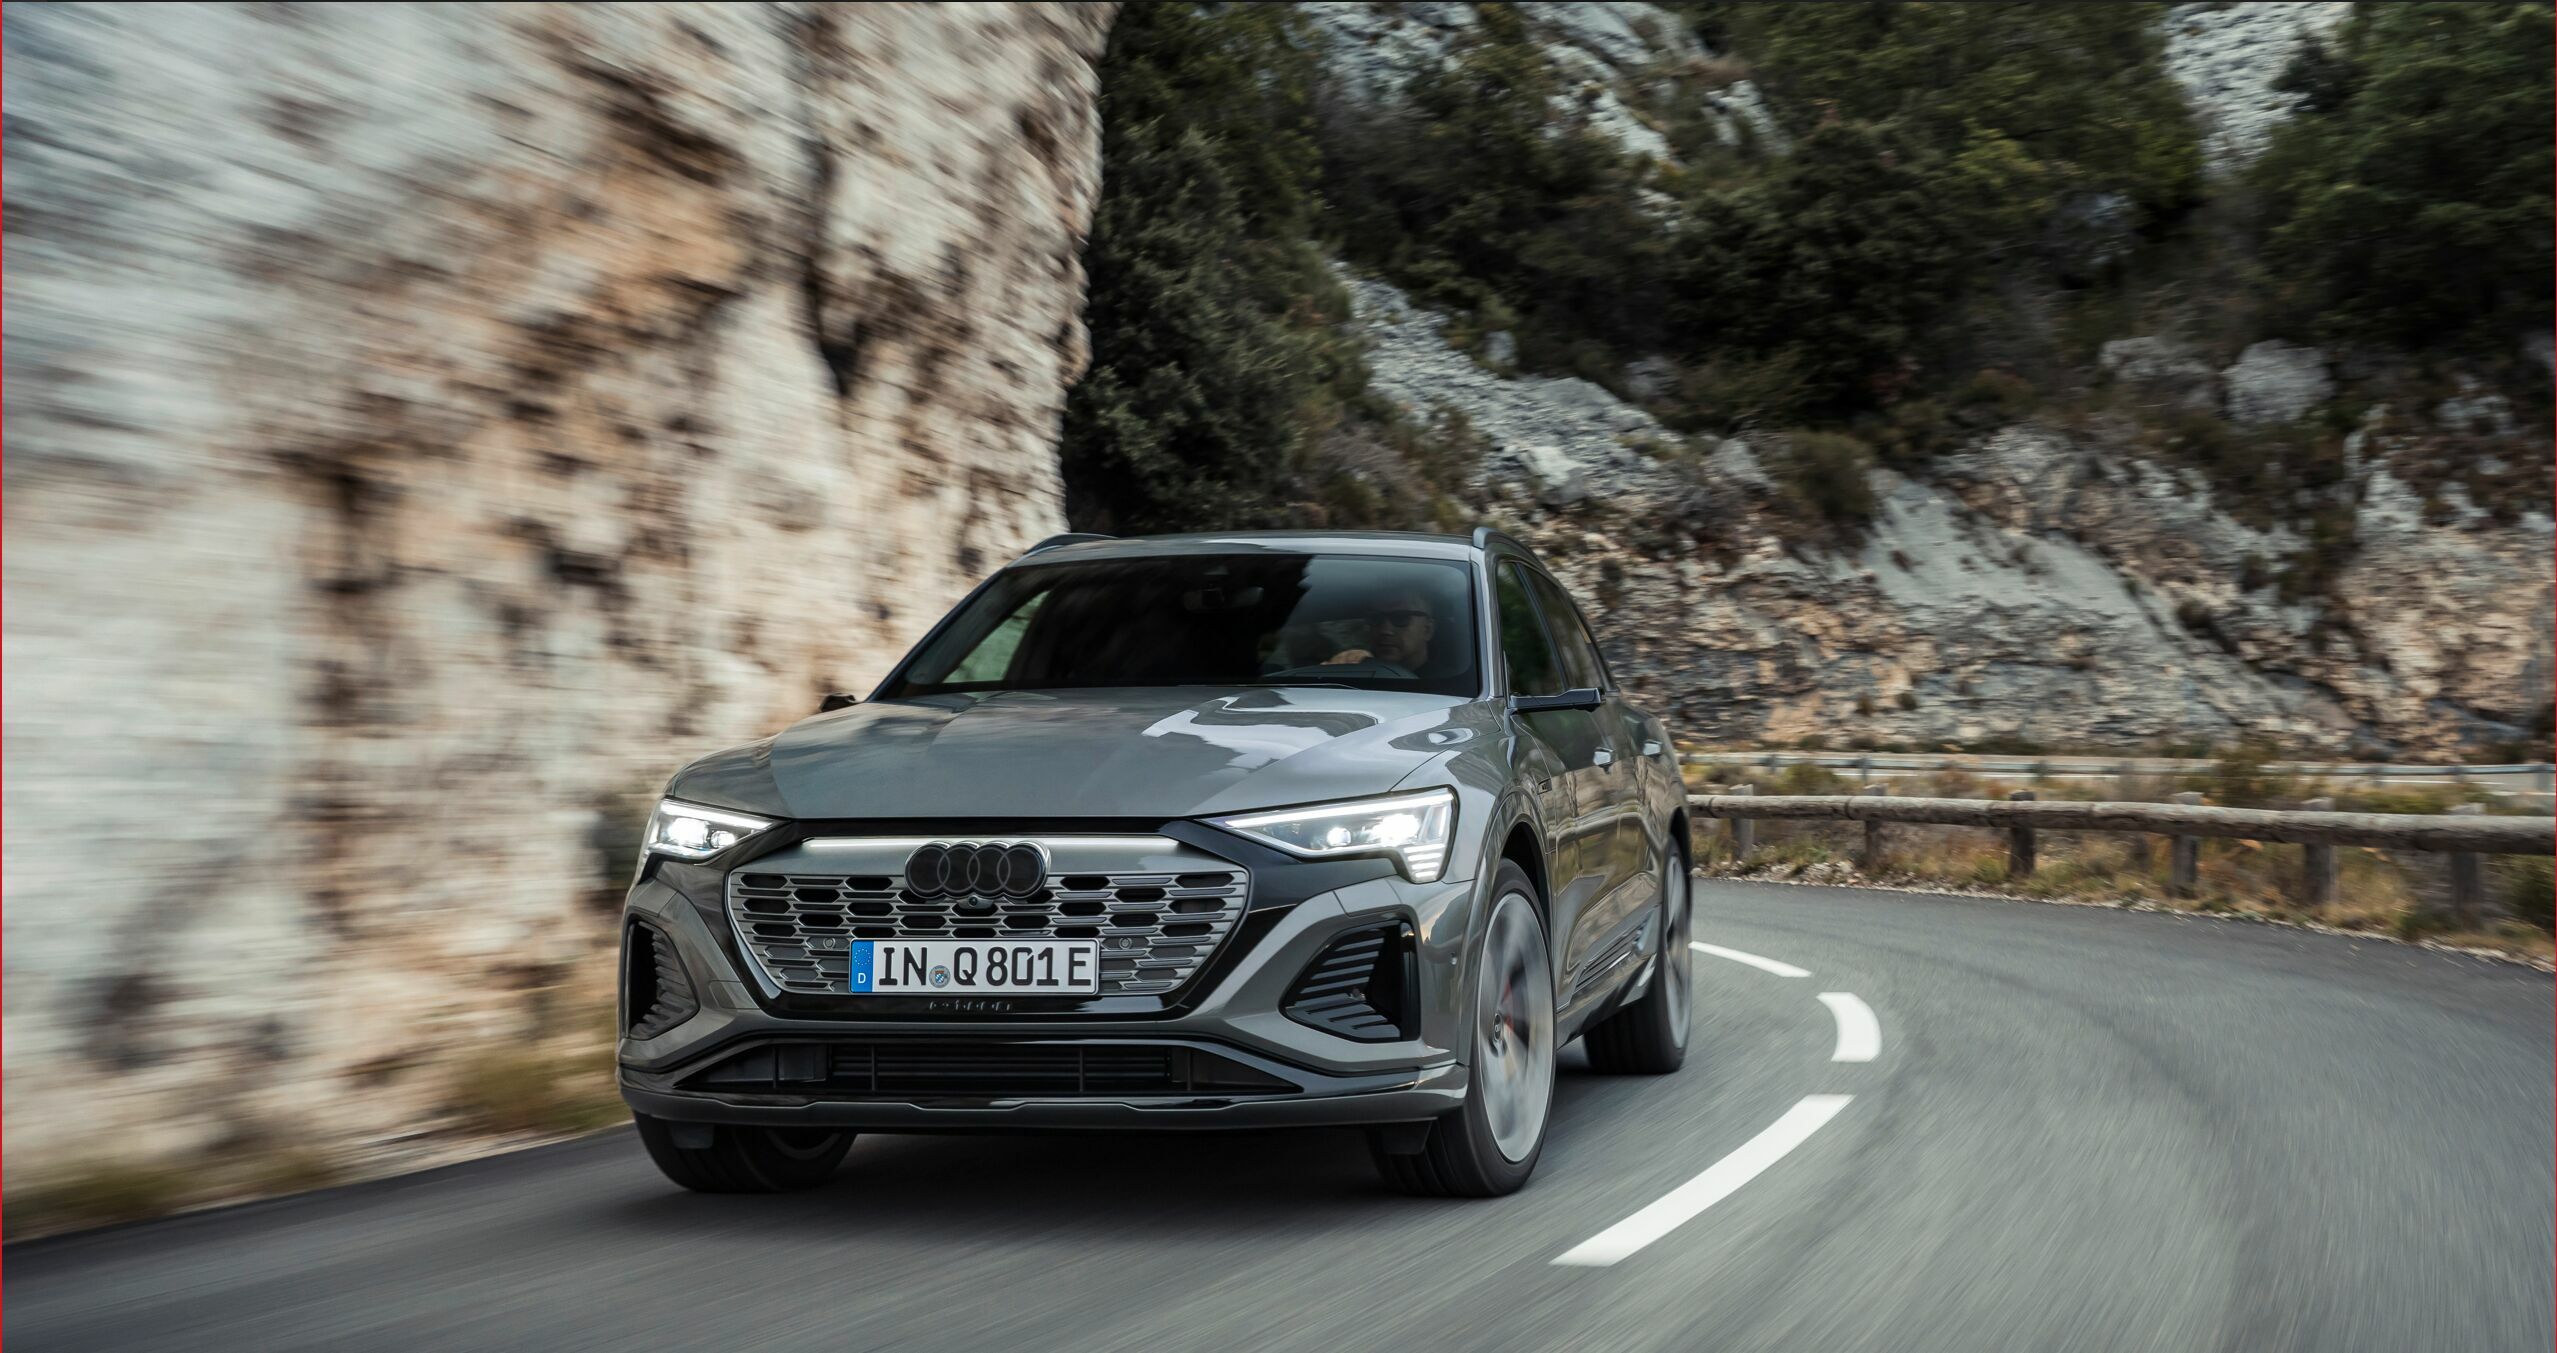 The New Audi Q8 e-tron: Improved Efficiency and Range, Refined